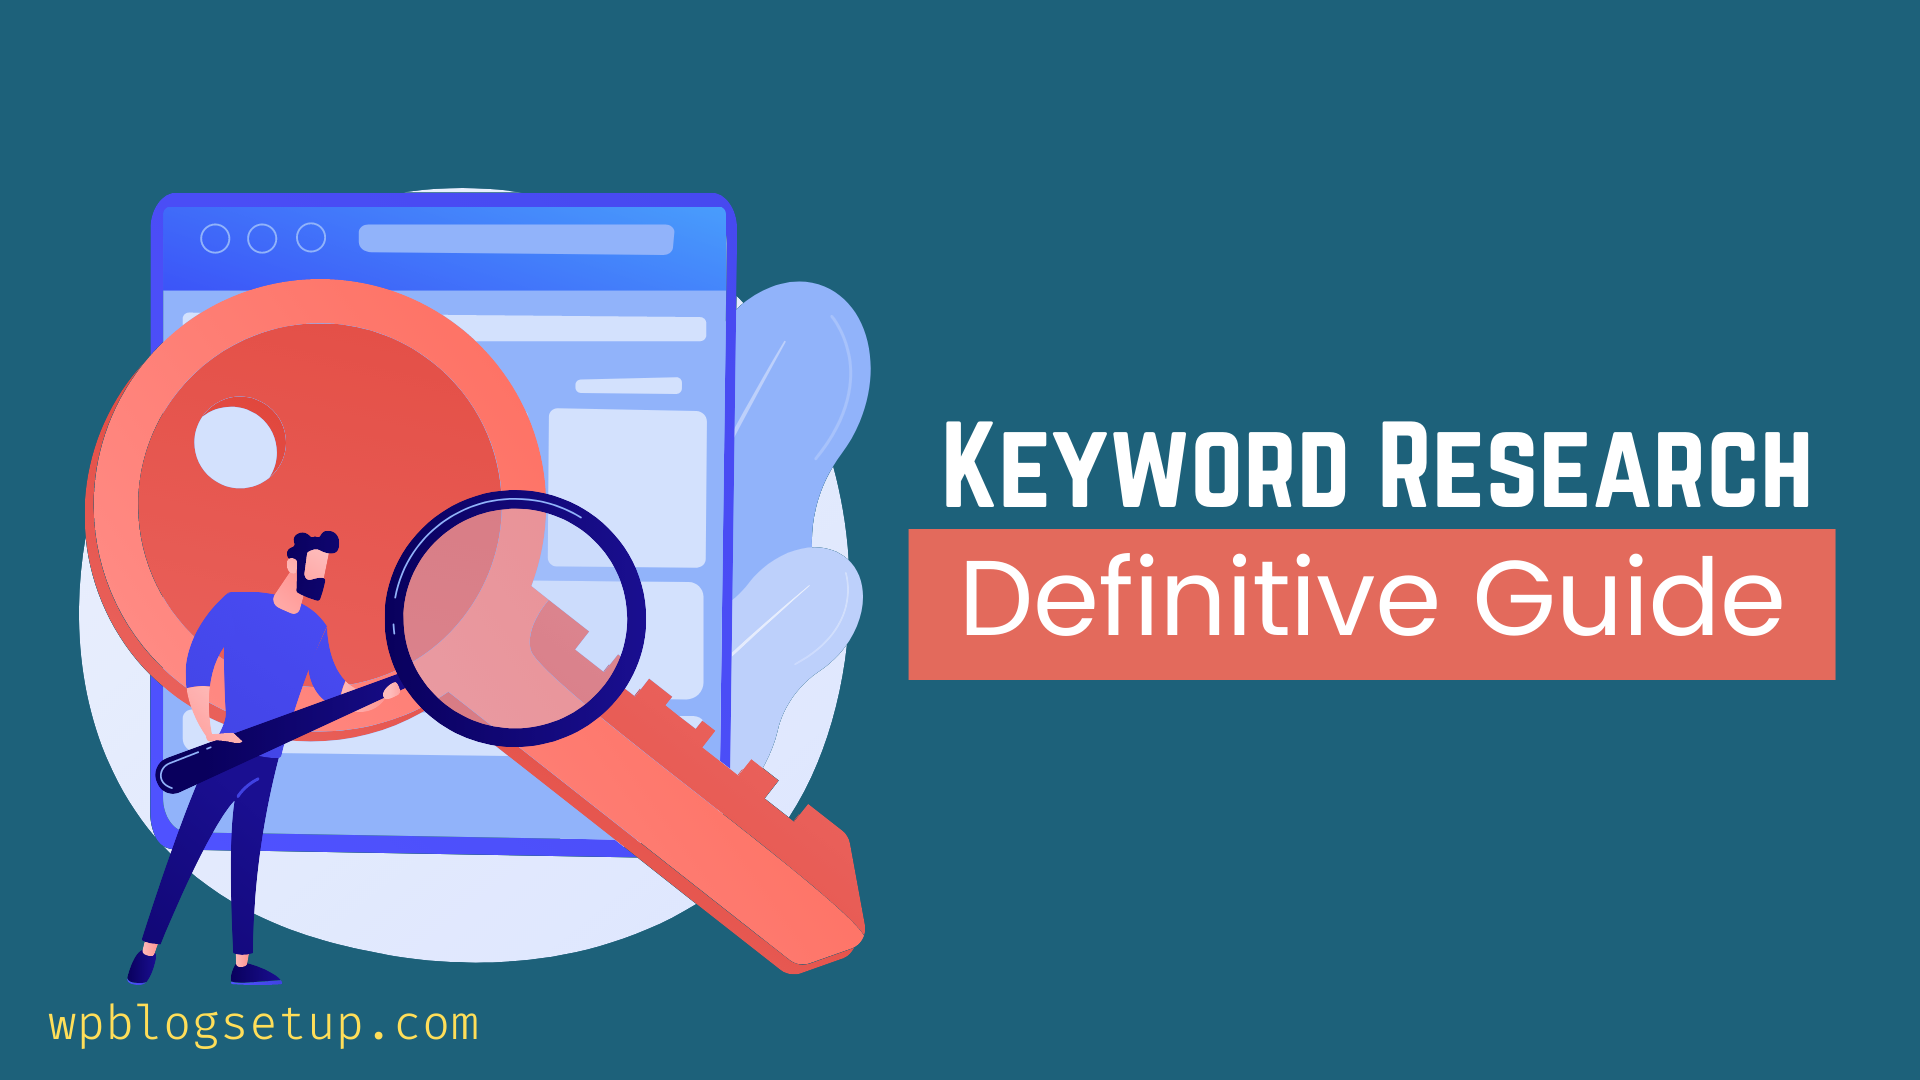 What is Keyword research